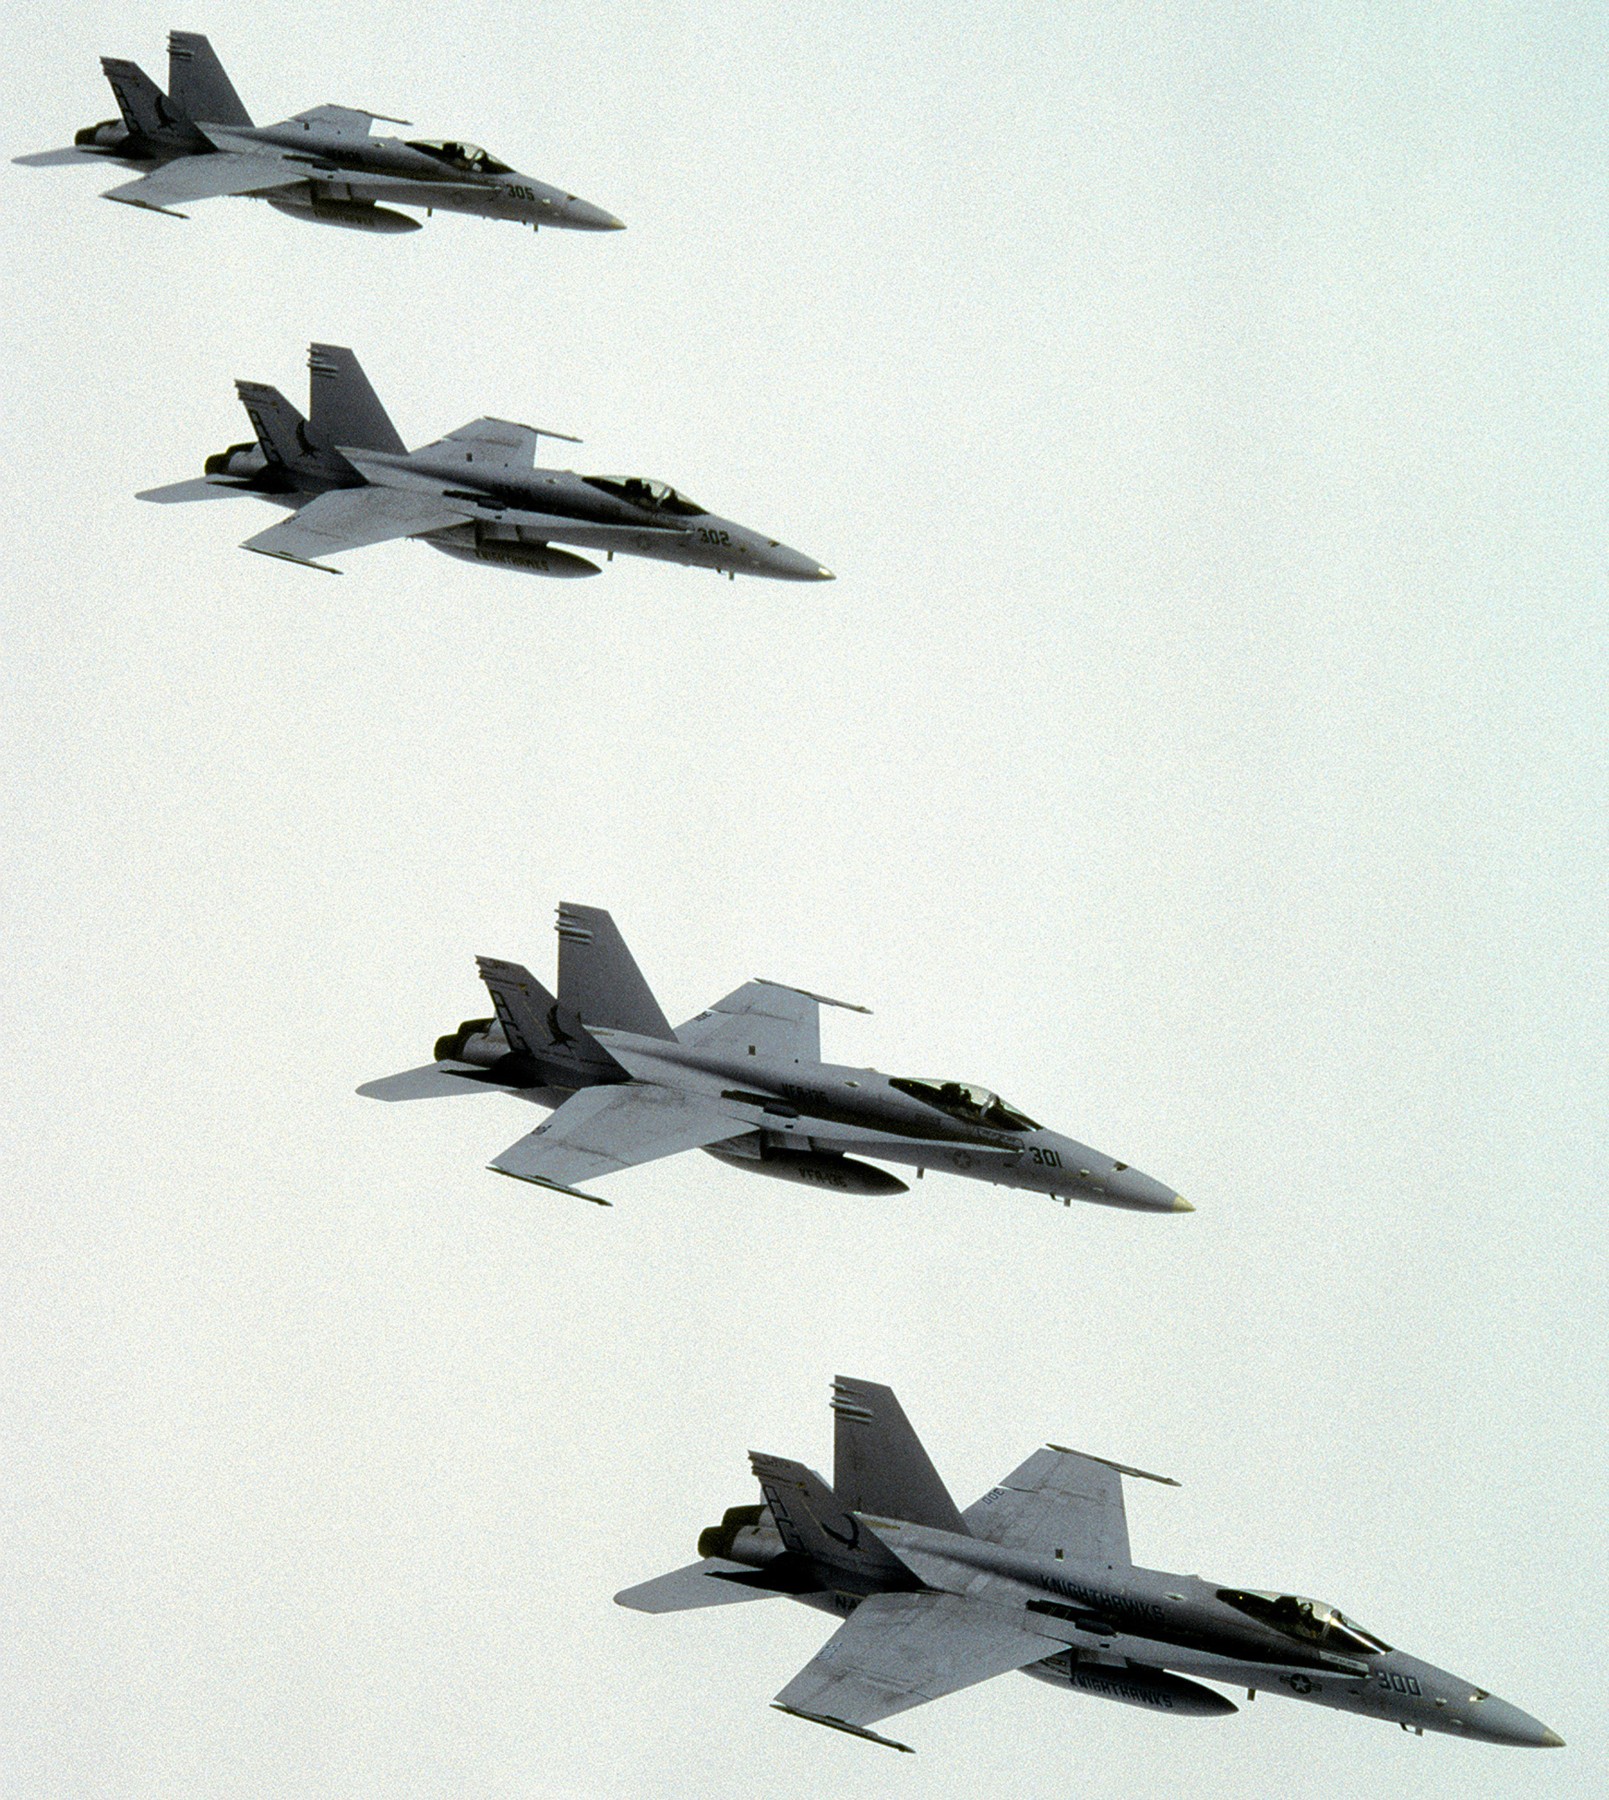 vfa-136 knighthawks strike fighter squadron f/a-18c hornet 1993 63 carrier air wing cvw-7